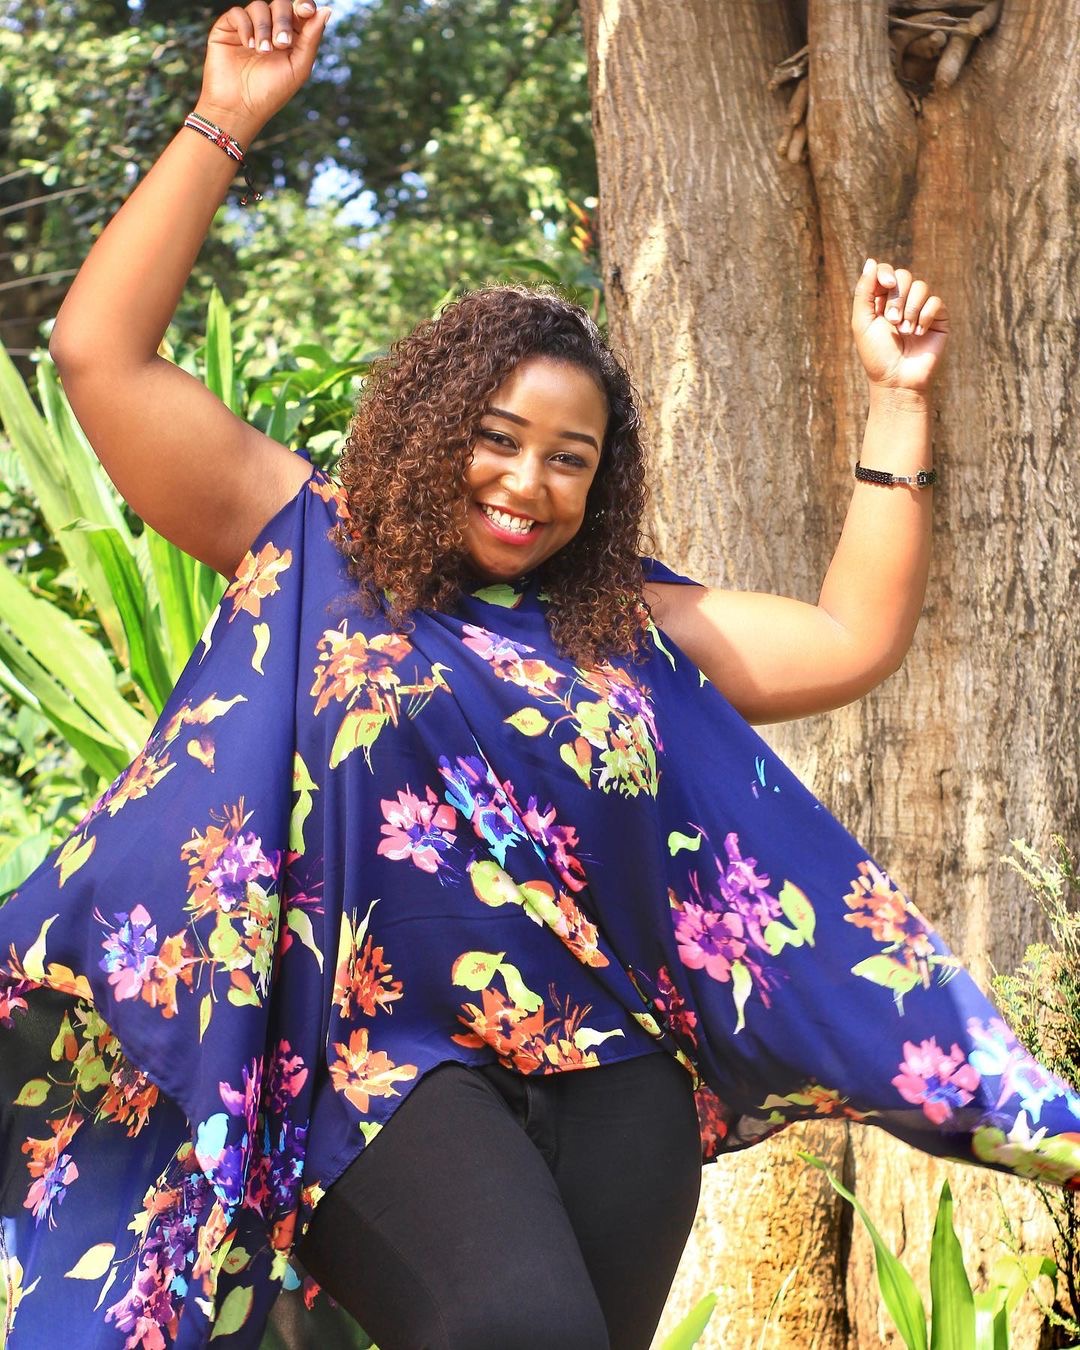 Betty Kyallo keeping her dating life private is smart